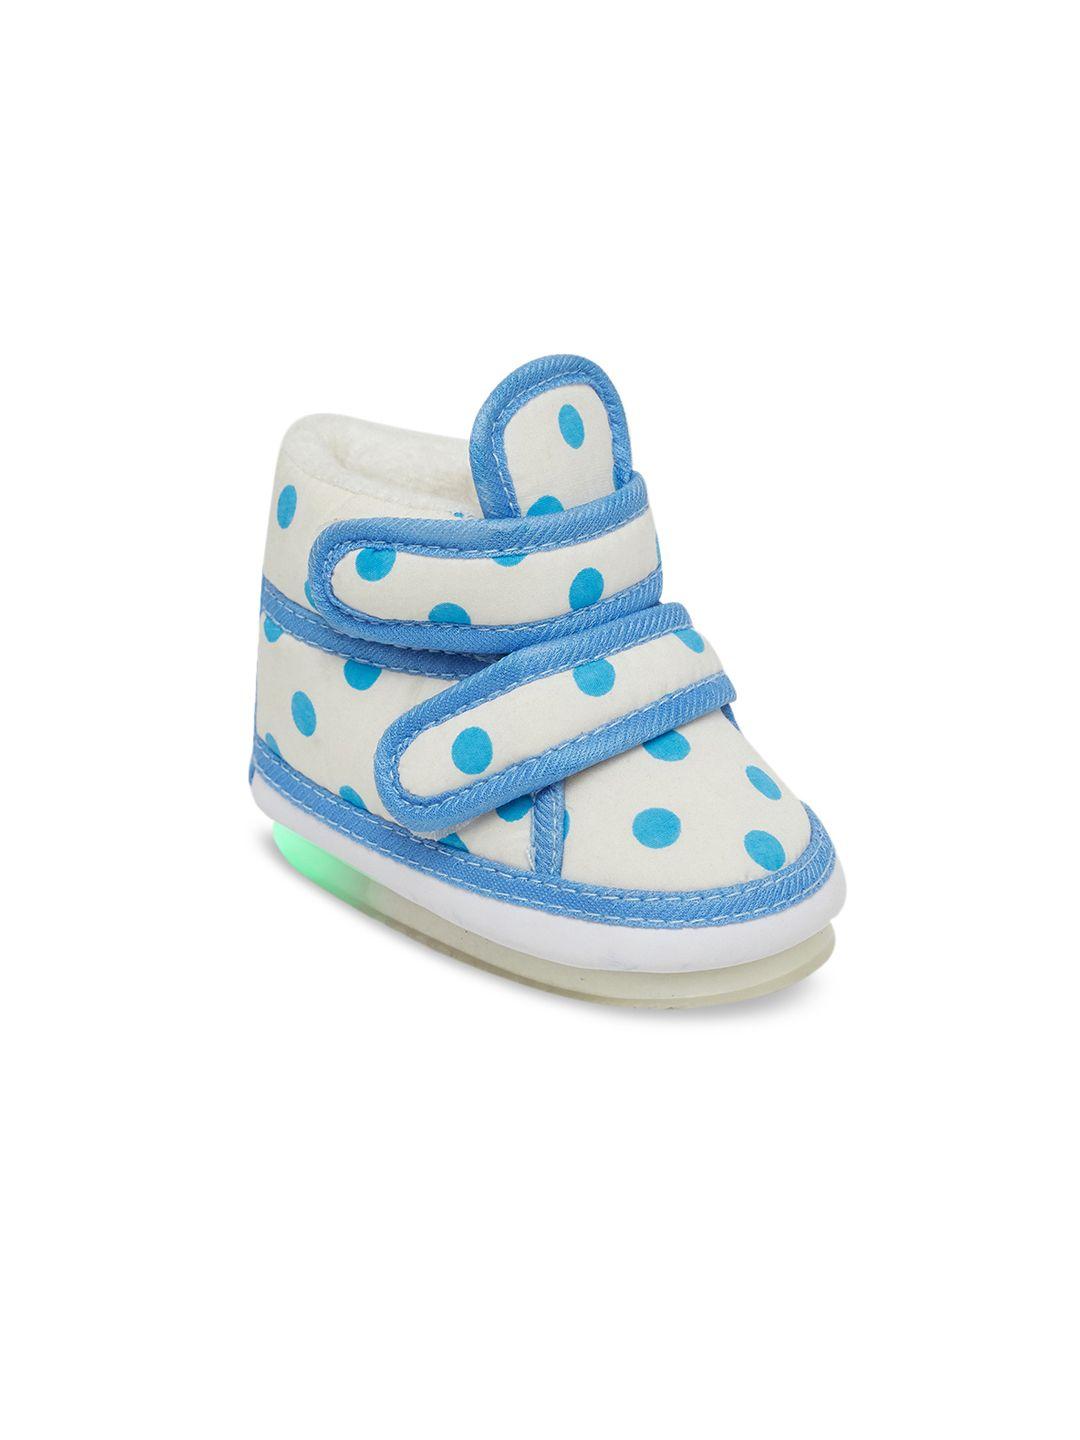 chiu kids off-white & blue printed led slip-on sneakers